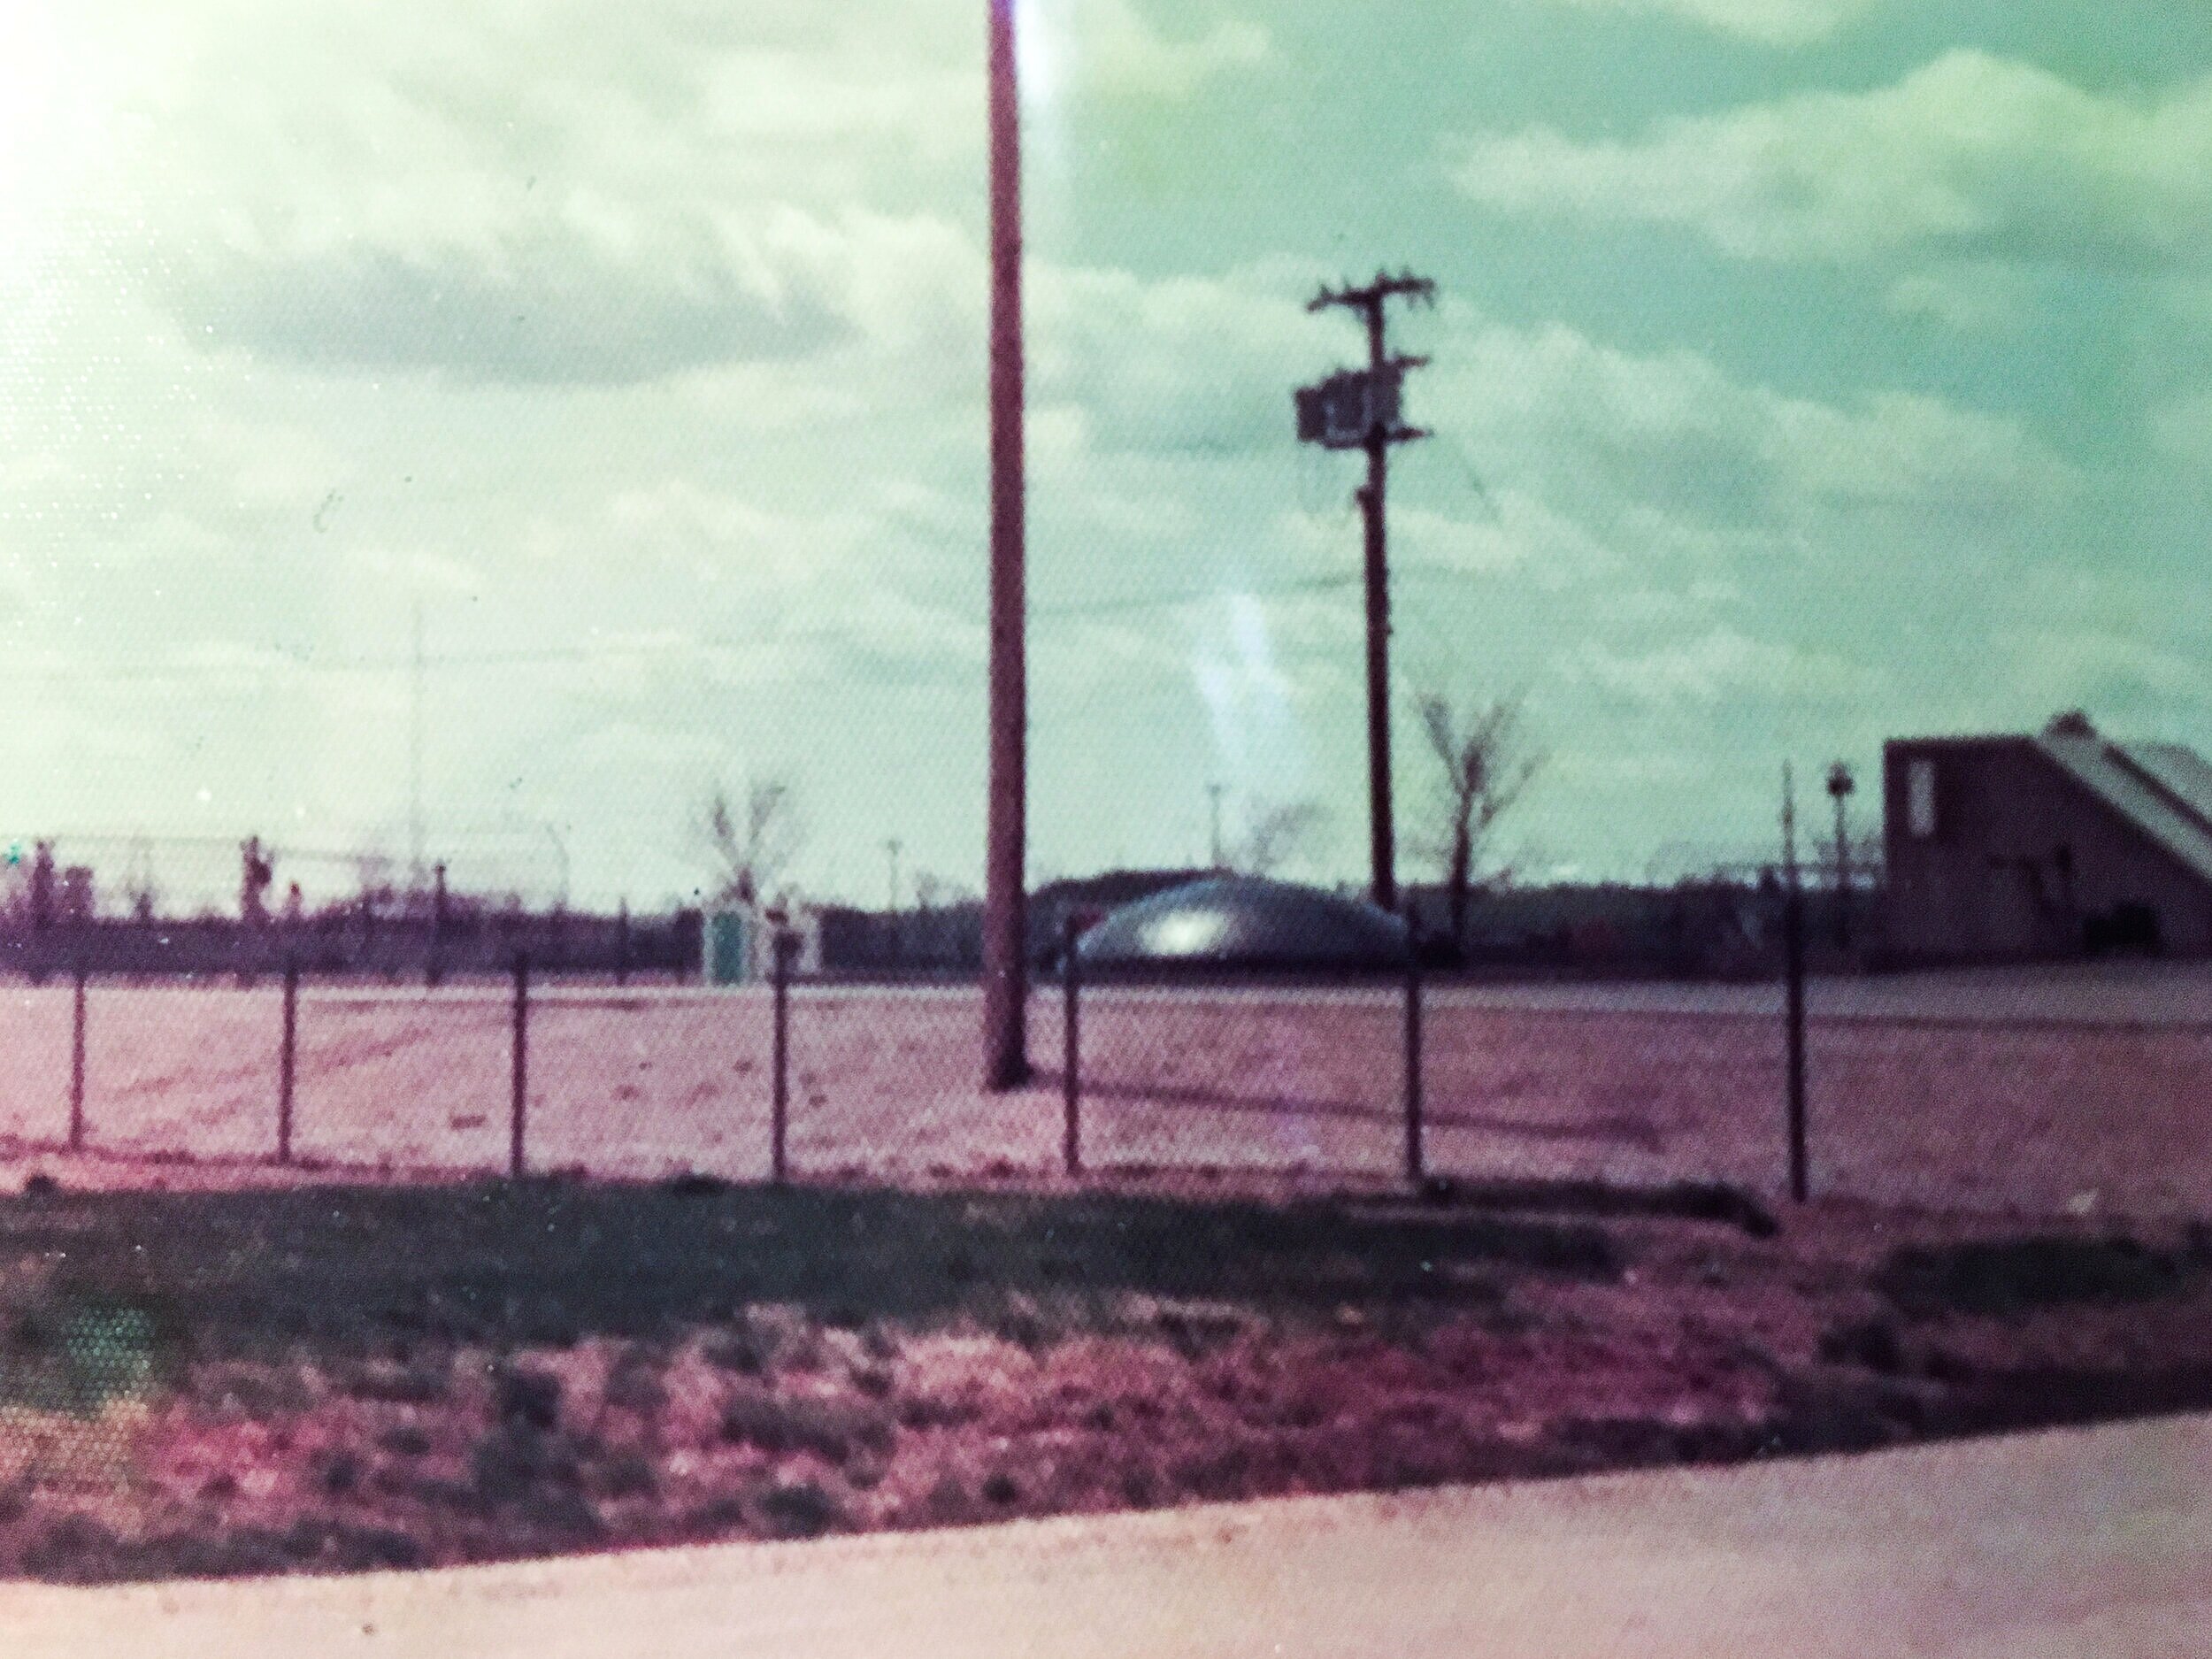  “Polaroid of Kilo-5 missile silo taken a few months after the sighting of the “black diamond” 1975”   